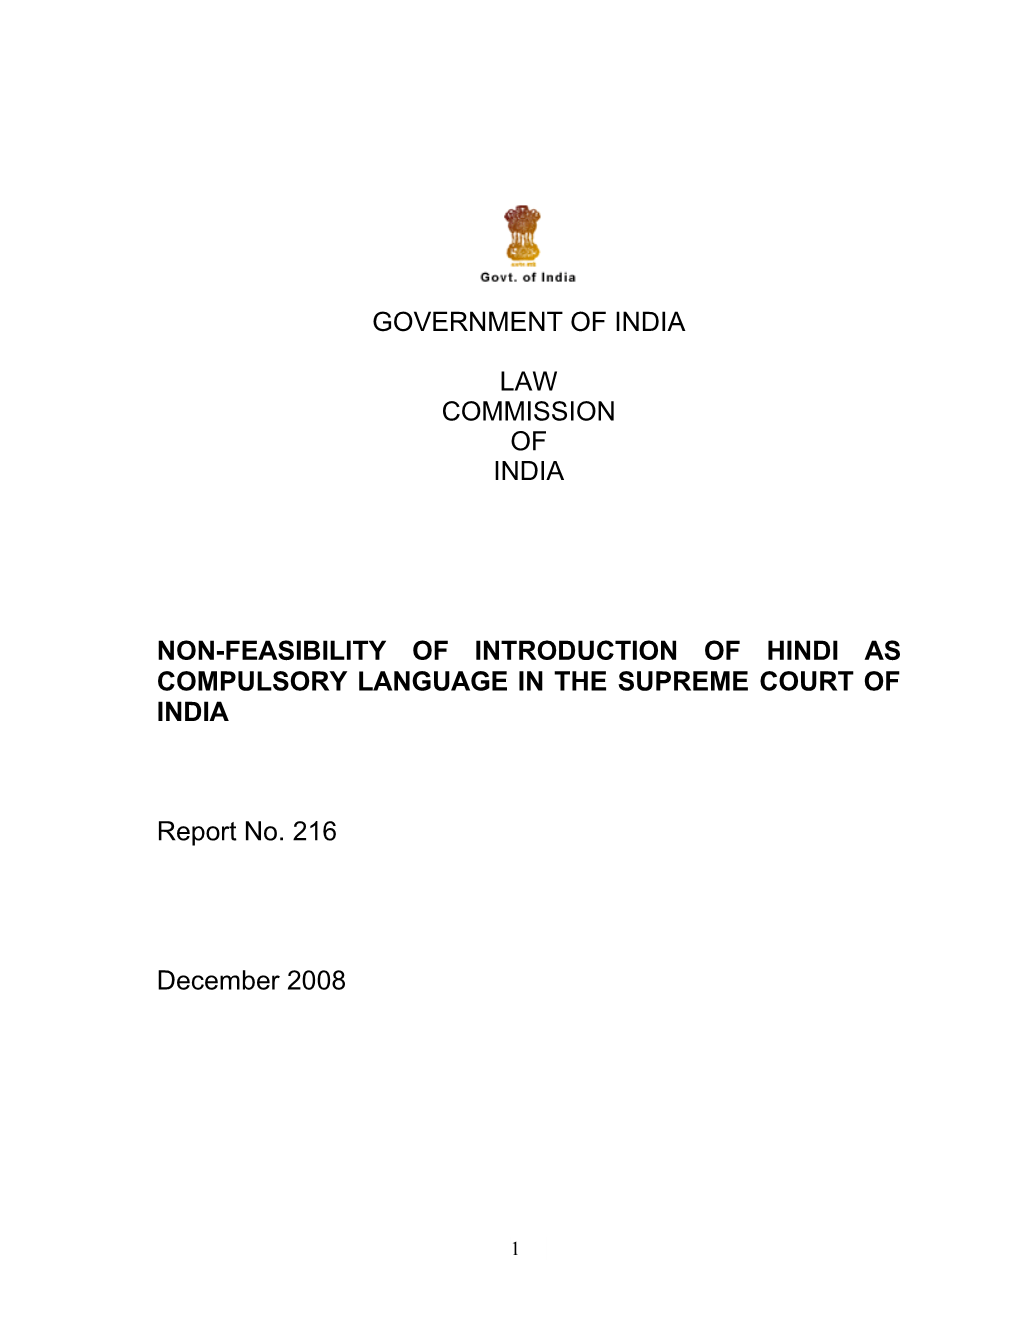 216Th Report on Non-Feasibility Of